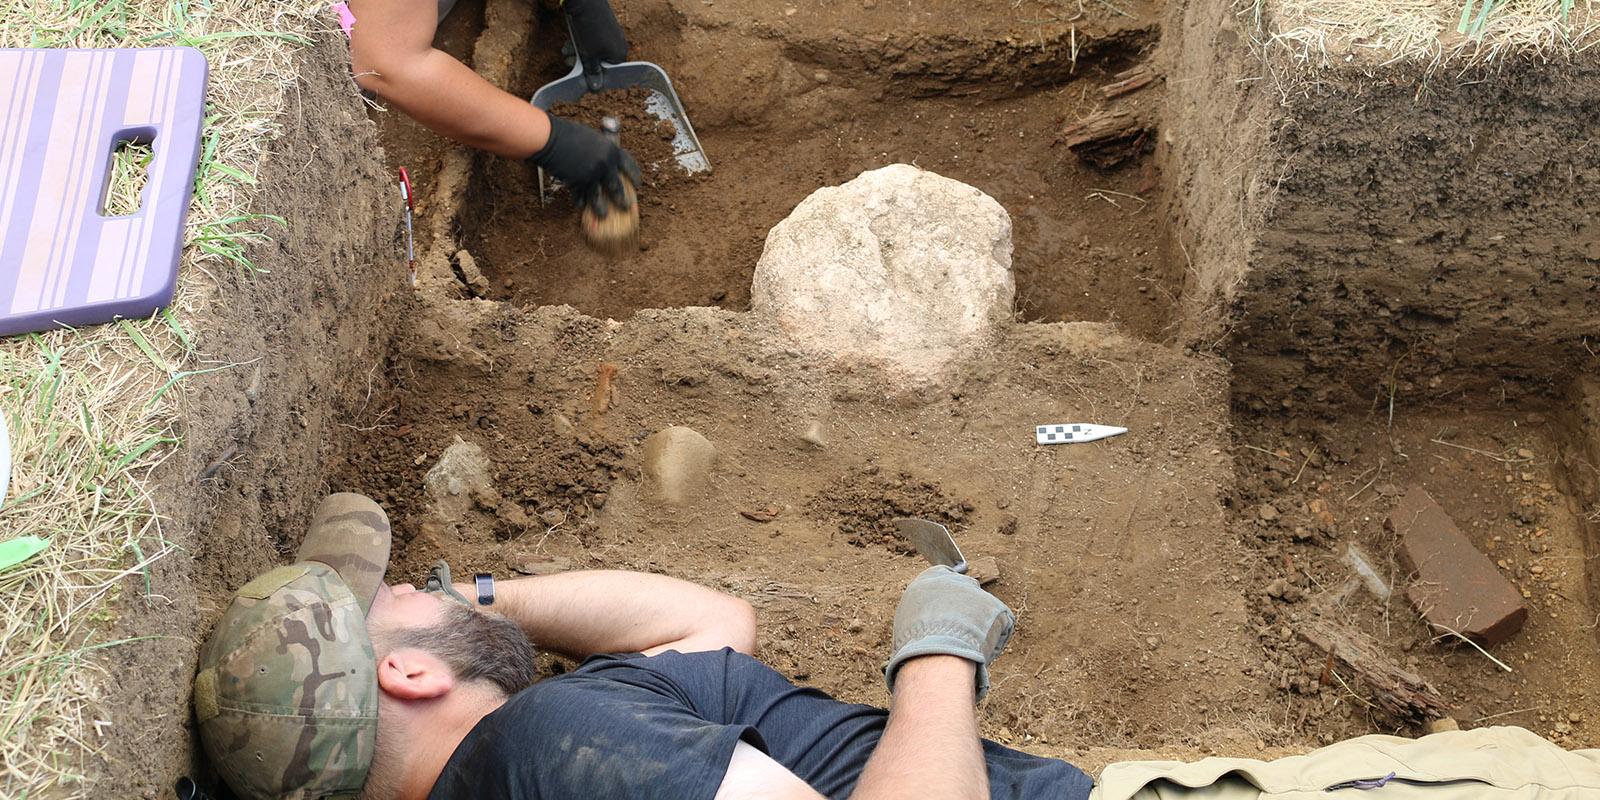 A man digs in a pit with rock artifacts around him